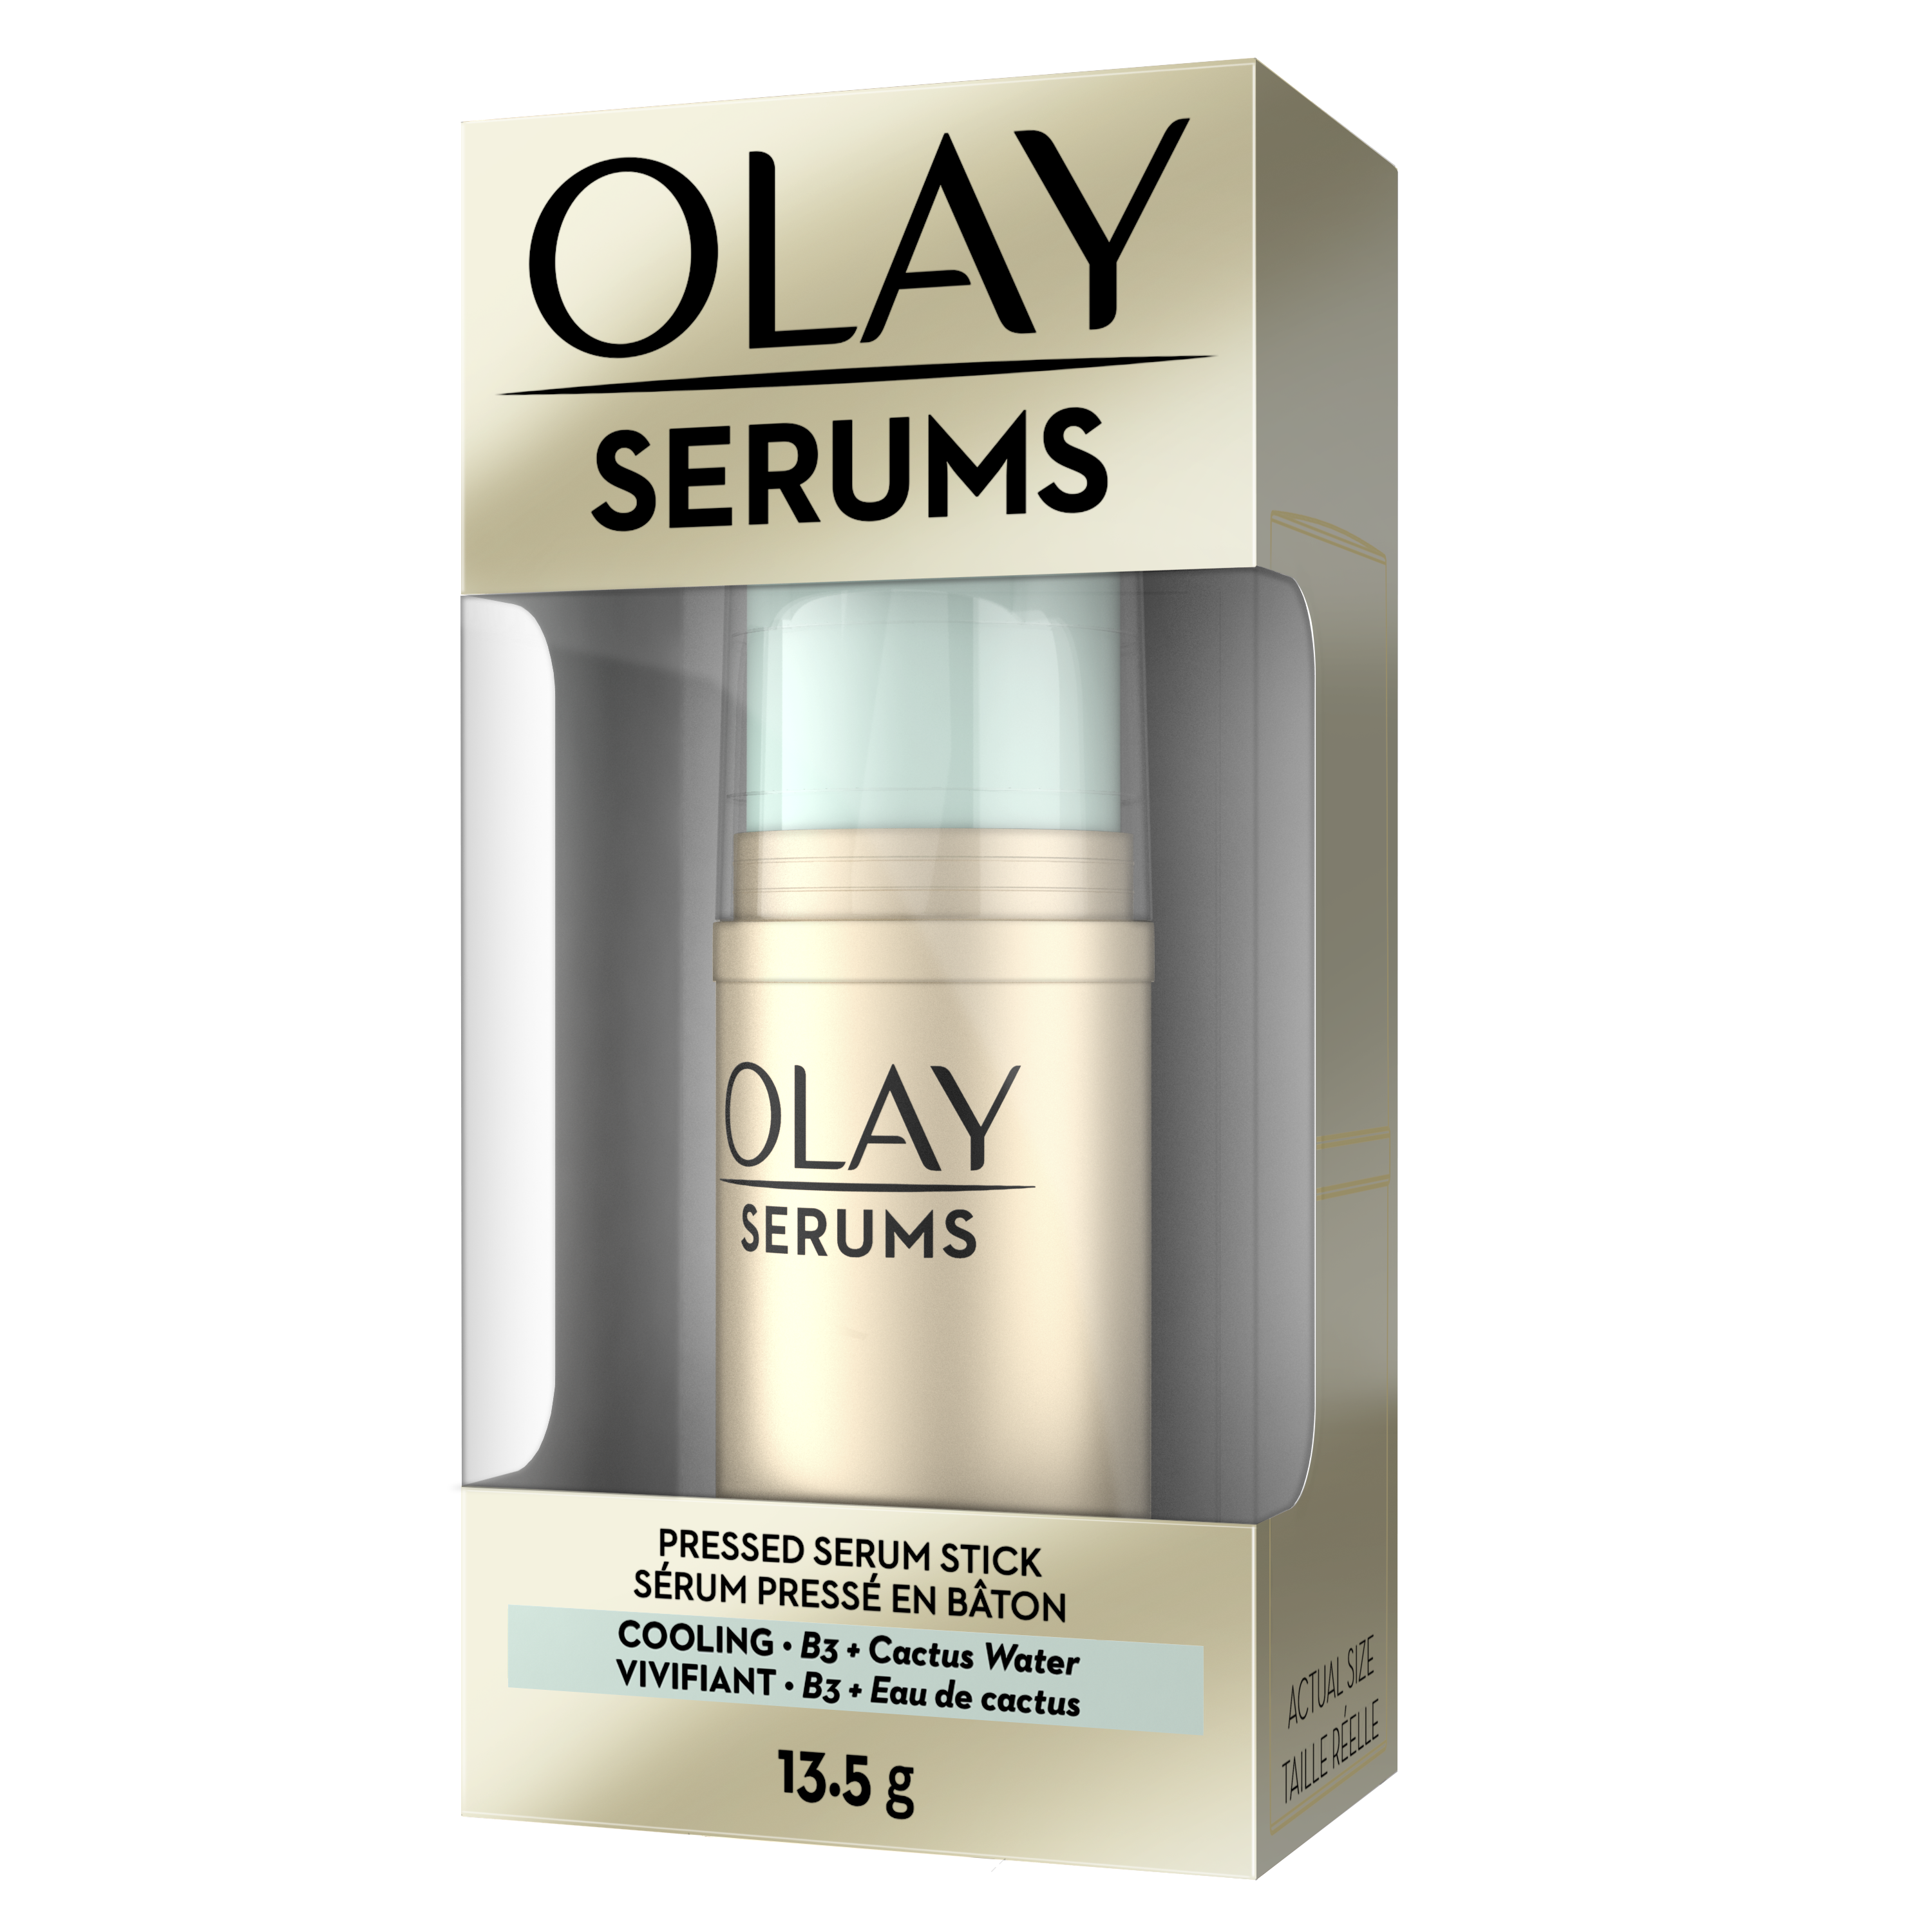 Olay Serums Pressed Serum Stick Cooling Hydration 13.5 g_1